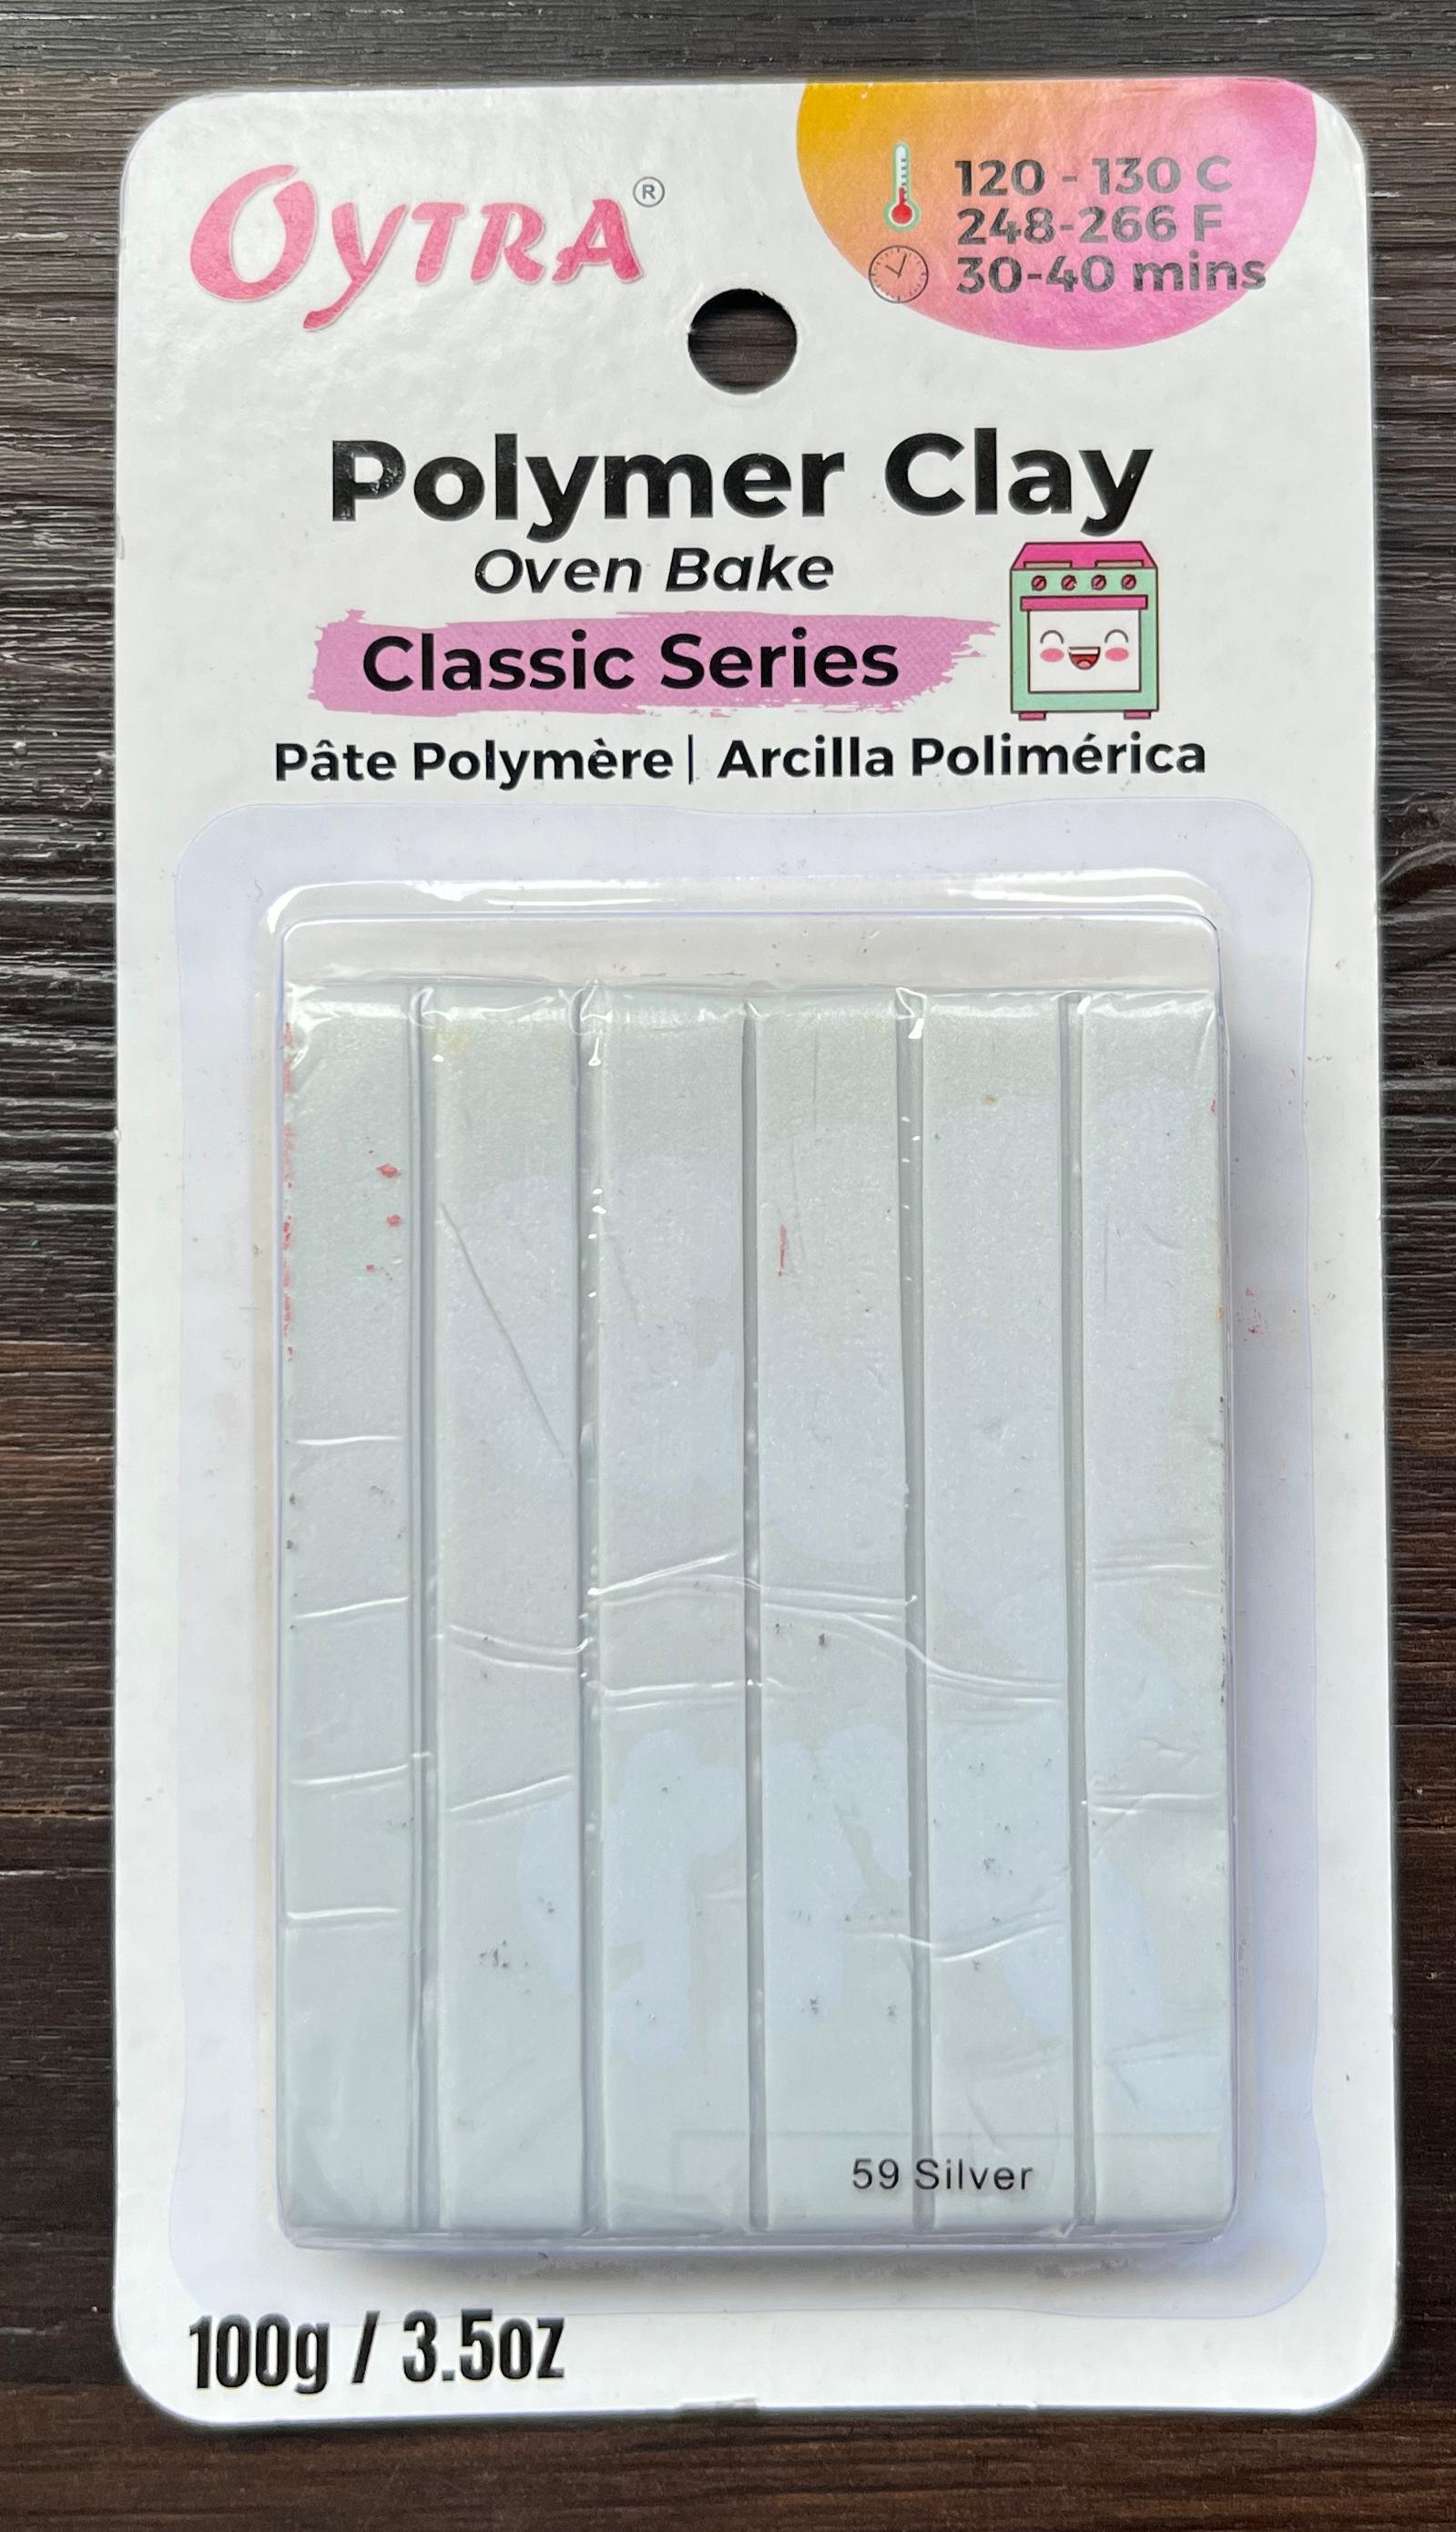 Polymer Clay Oven Bake Classic Series Silver 59